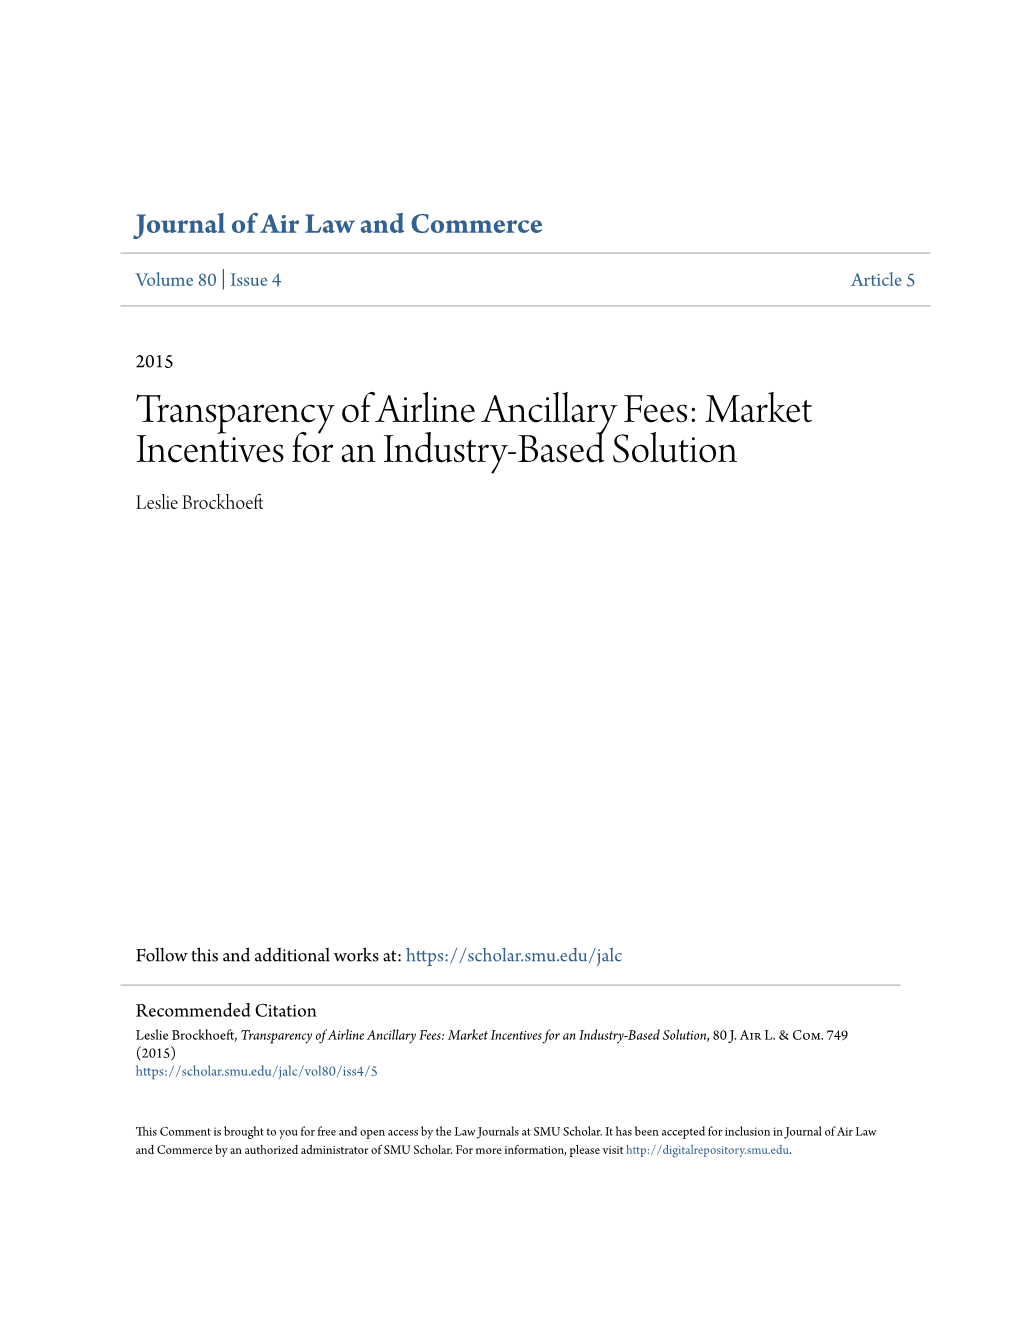 Transparency of Airline Ancillary Fees: Market Incentives for an Industry-Based Solution Leslie Brockhoeft